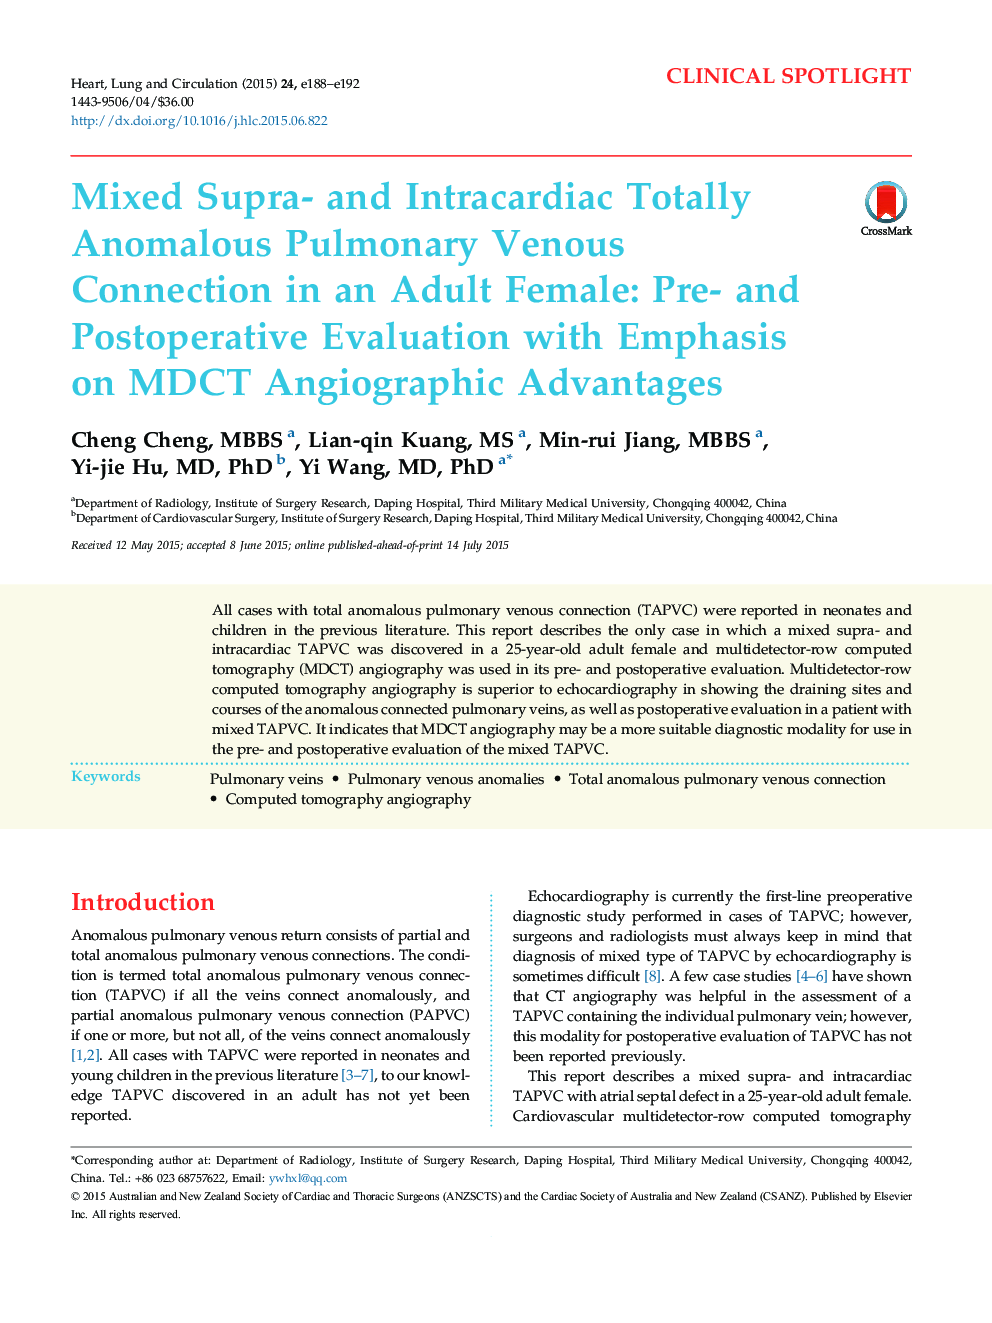 Mixed Supra- and Intracardiac Totally Anomalous Pulmonary Venous Connection in an Adult Female: Pre- and Postoperative Evaluation with Emphasis on MDCT Angiographic Advantages